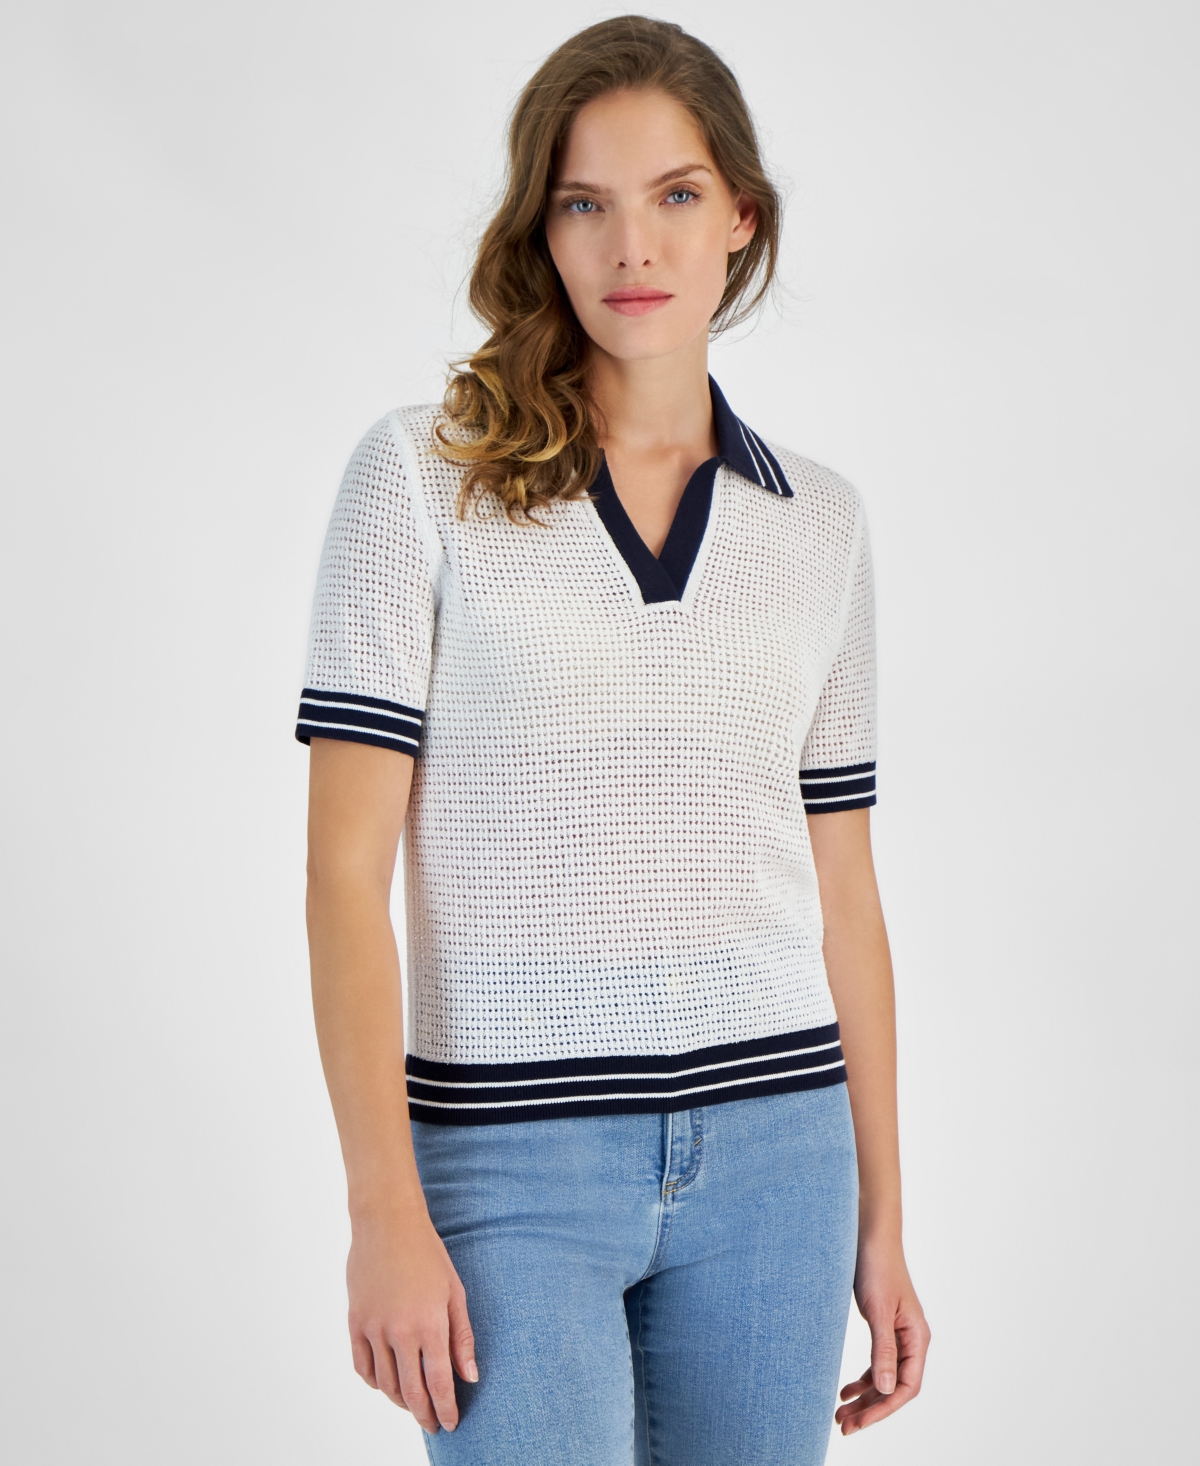 Women's Johnny-Collar Short-Sleeve Sweater - Brght Wh/n